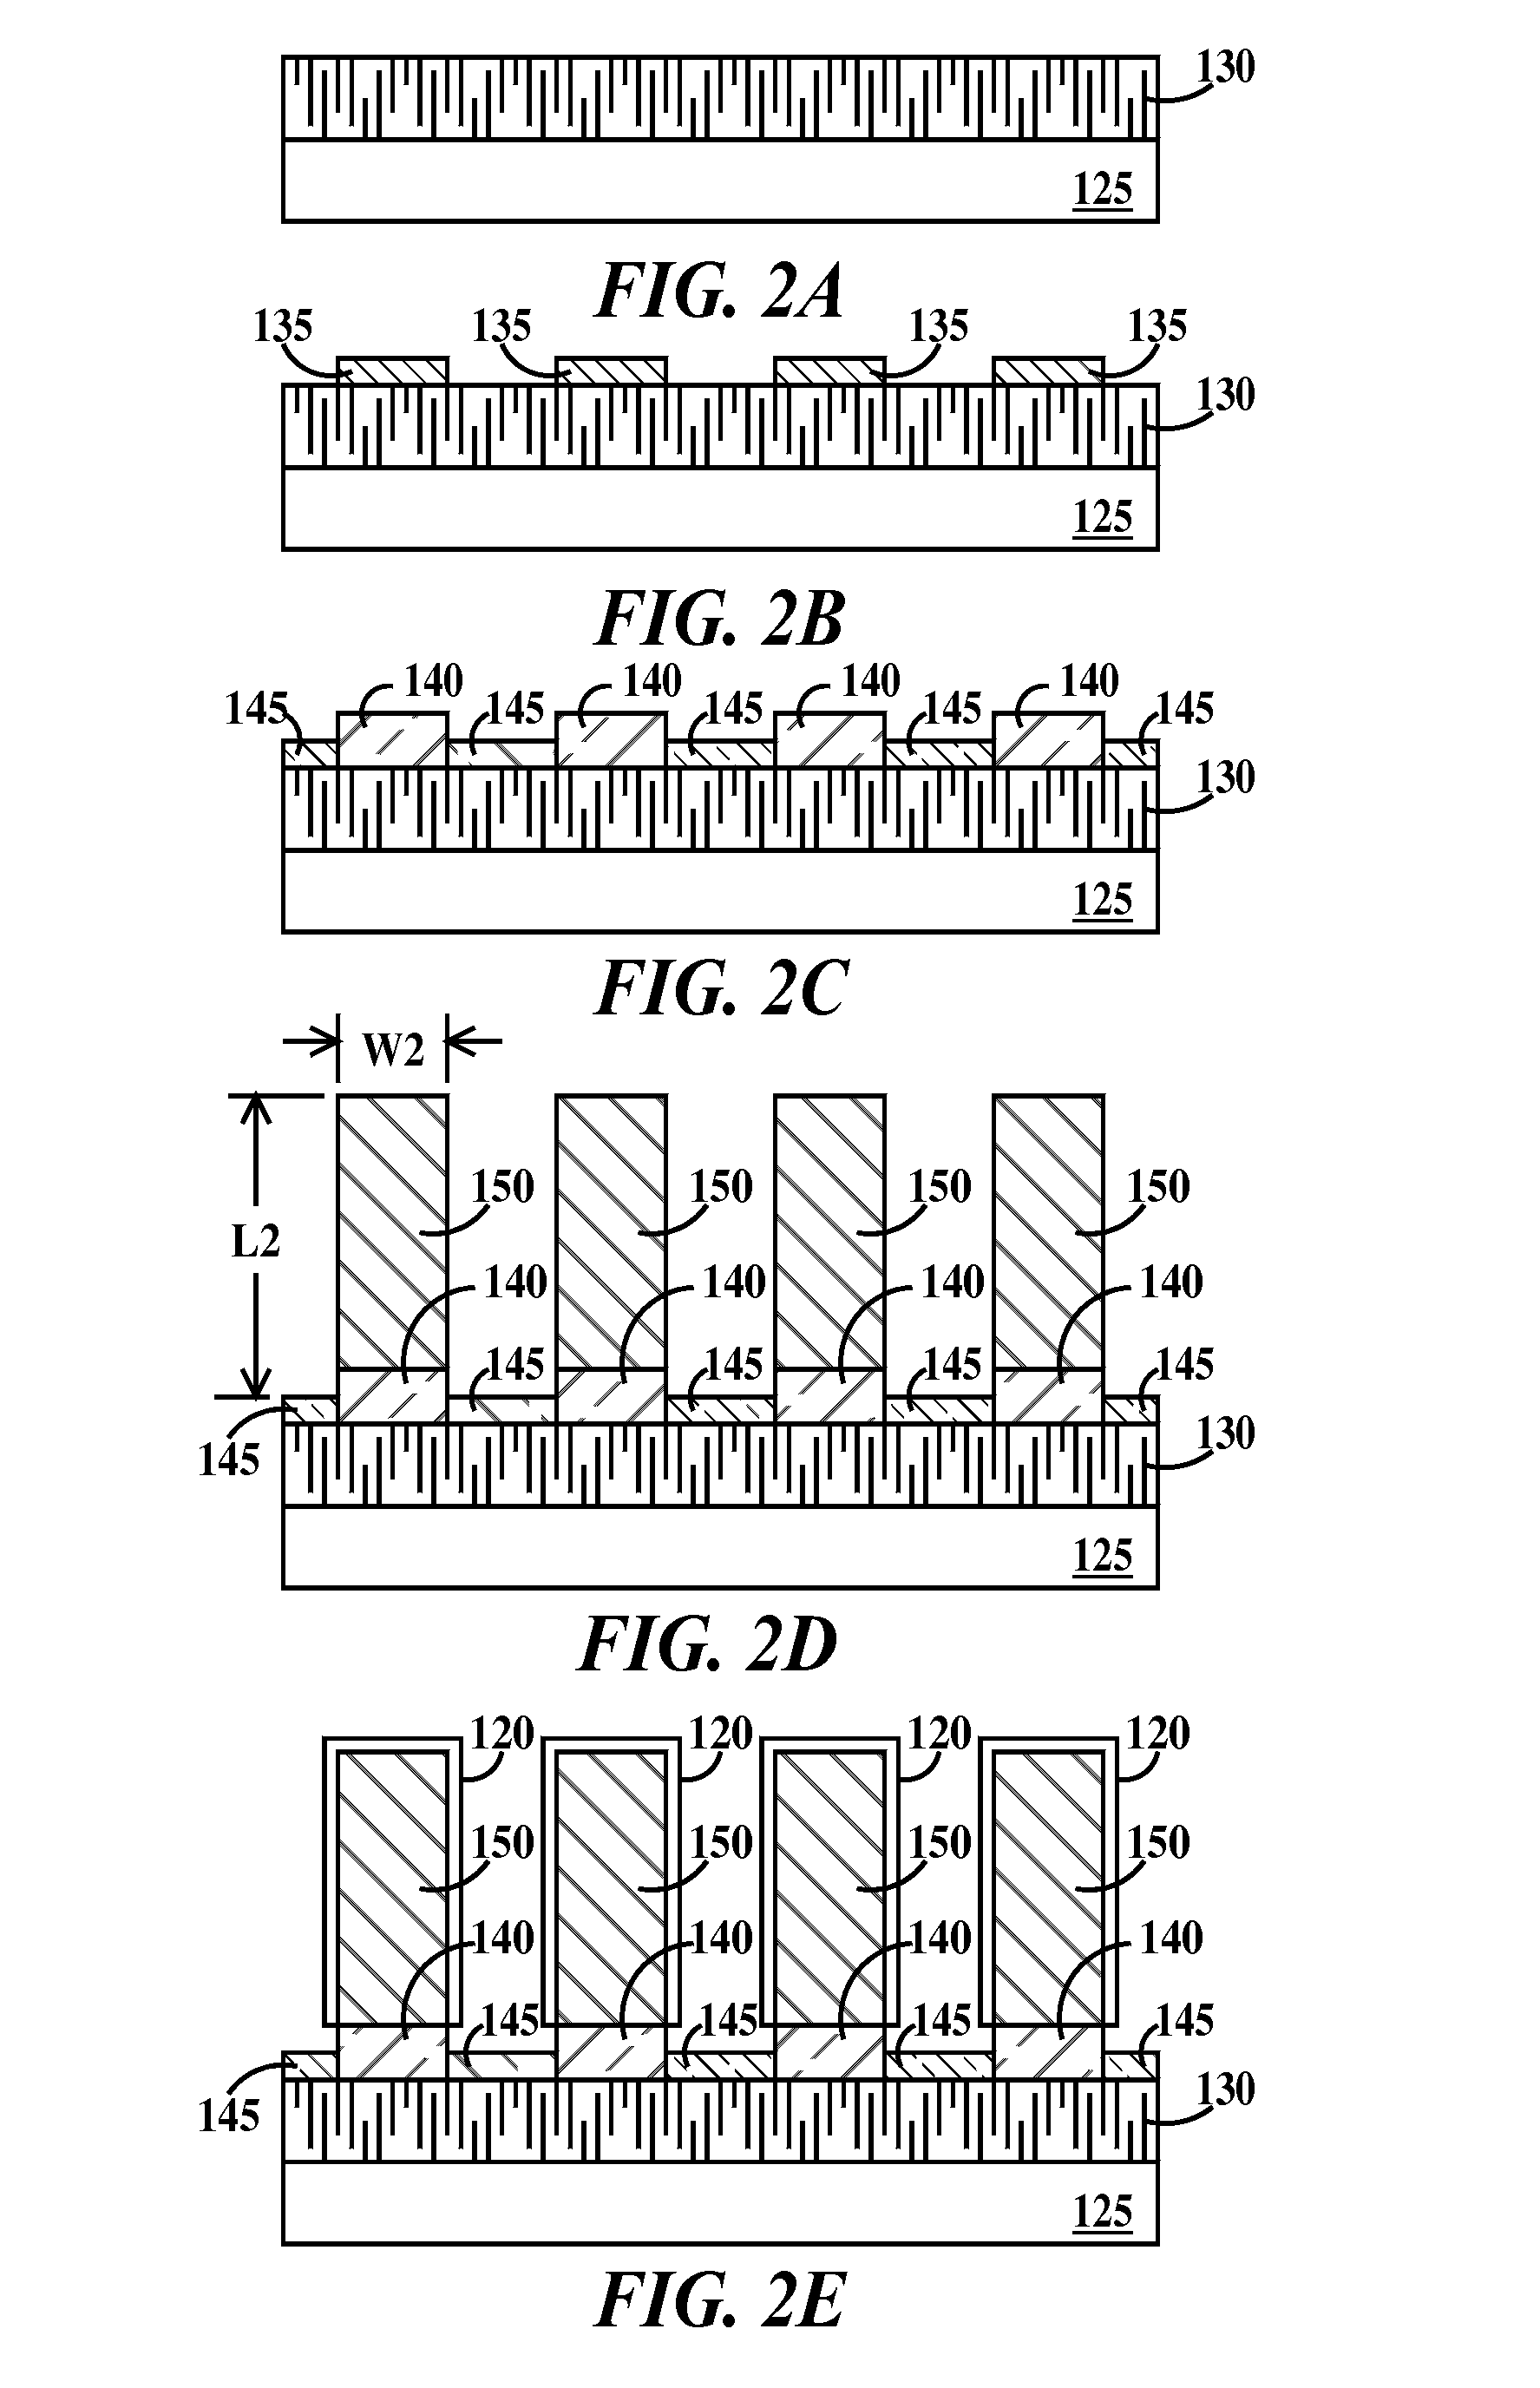 Chemical and particulate filters containing chemically modified carbon nanotube structures